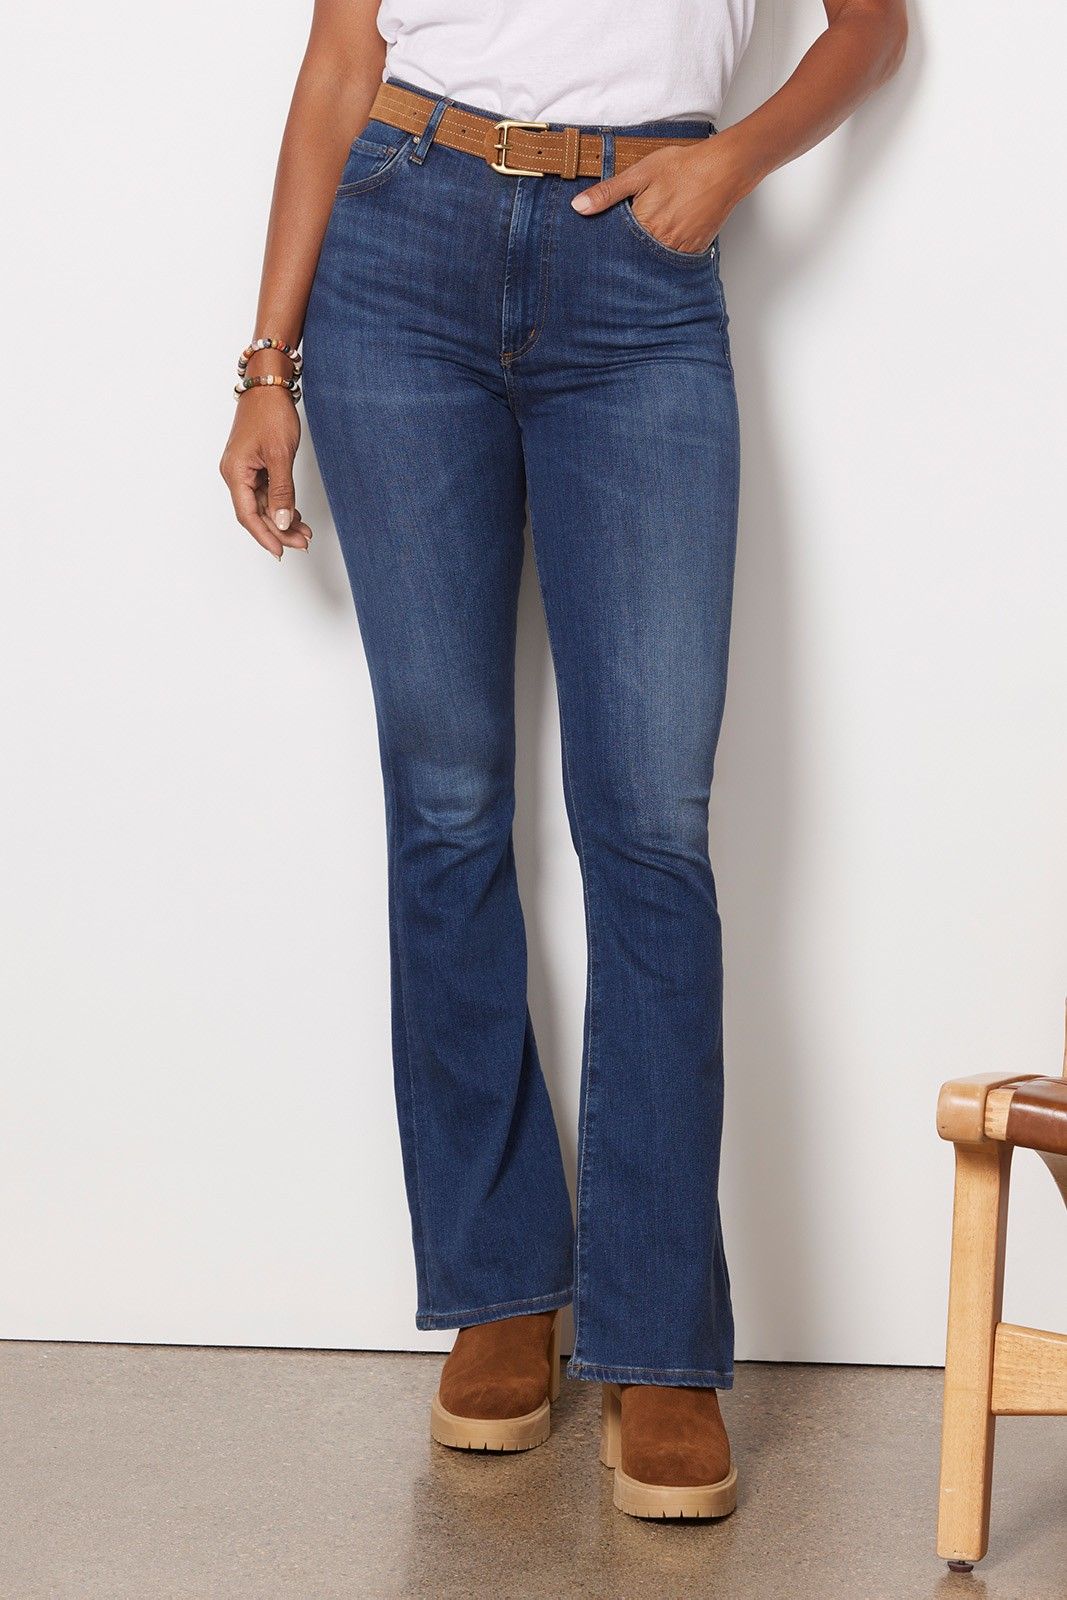 CITIZENS OF HUMANITY Lilah Bootcut Jean | EVEREVE | Evereve